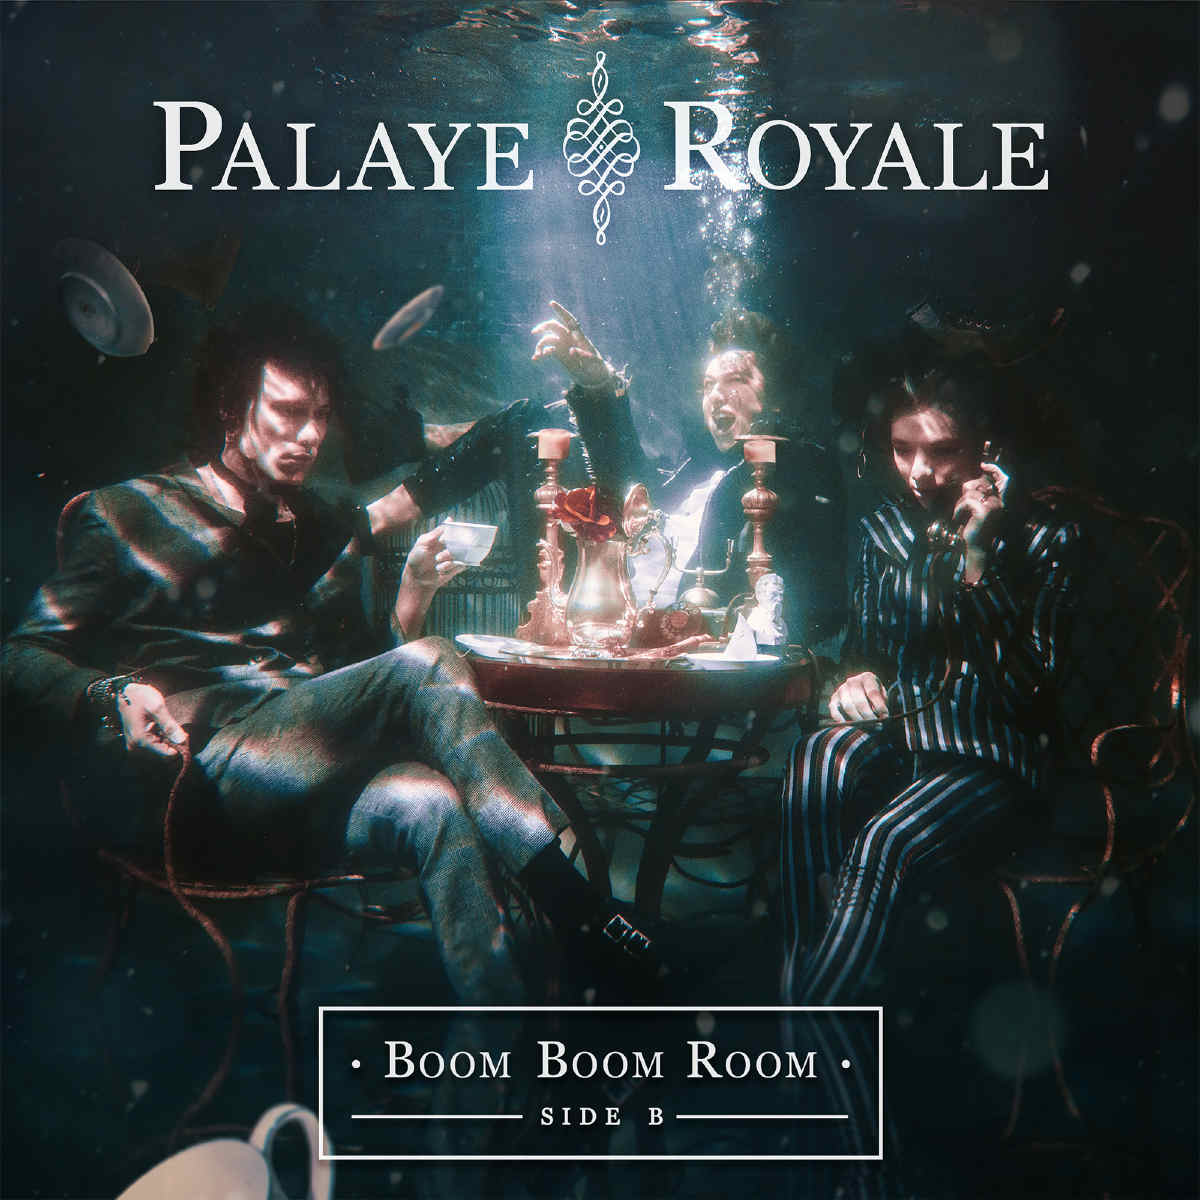 Soundhound Live Like We Want To By Palaye Royale